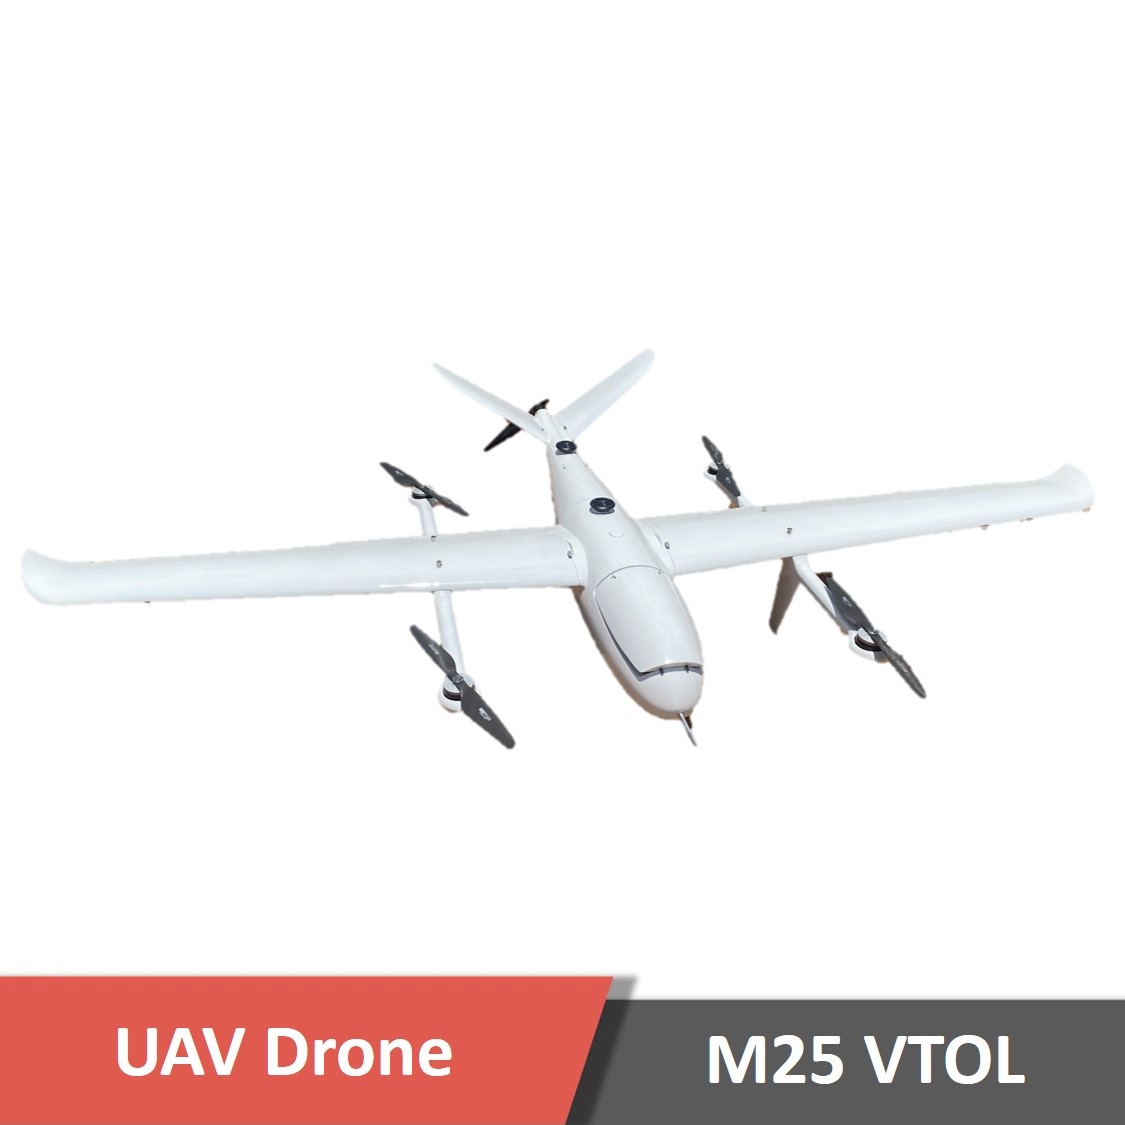 M25 1 - vtol drone,long endurance,fixedwing uav,t-tail,t-tail drone,cargo drone,wind resistance,detachable load,detachable payload,mapping drone,surveying drone,fixed-wing uav - motionew - 3